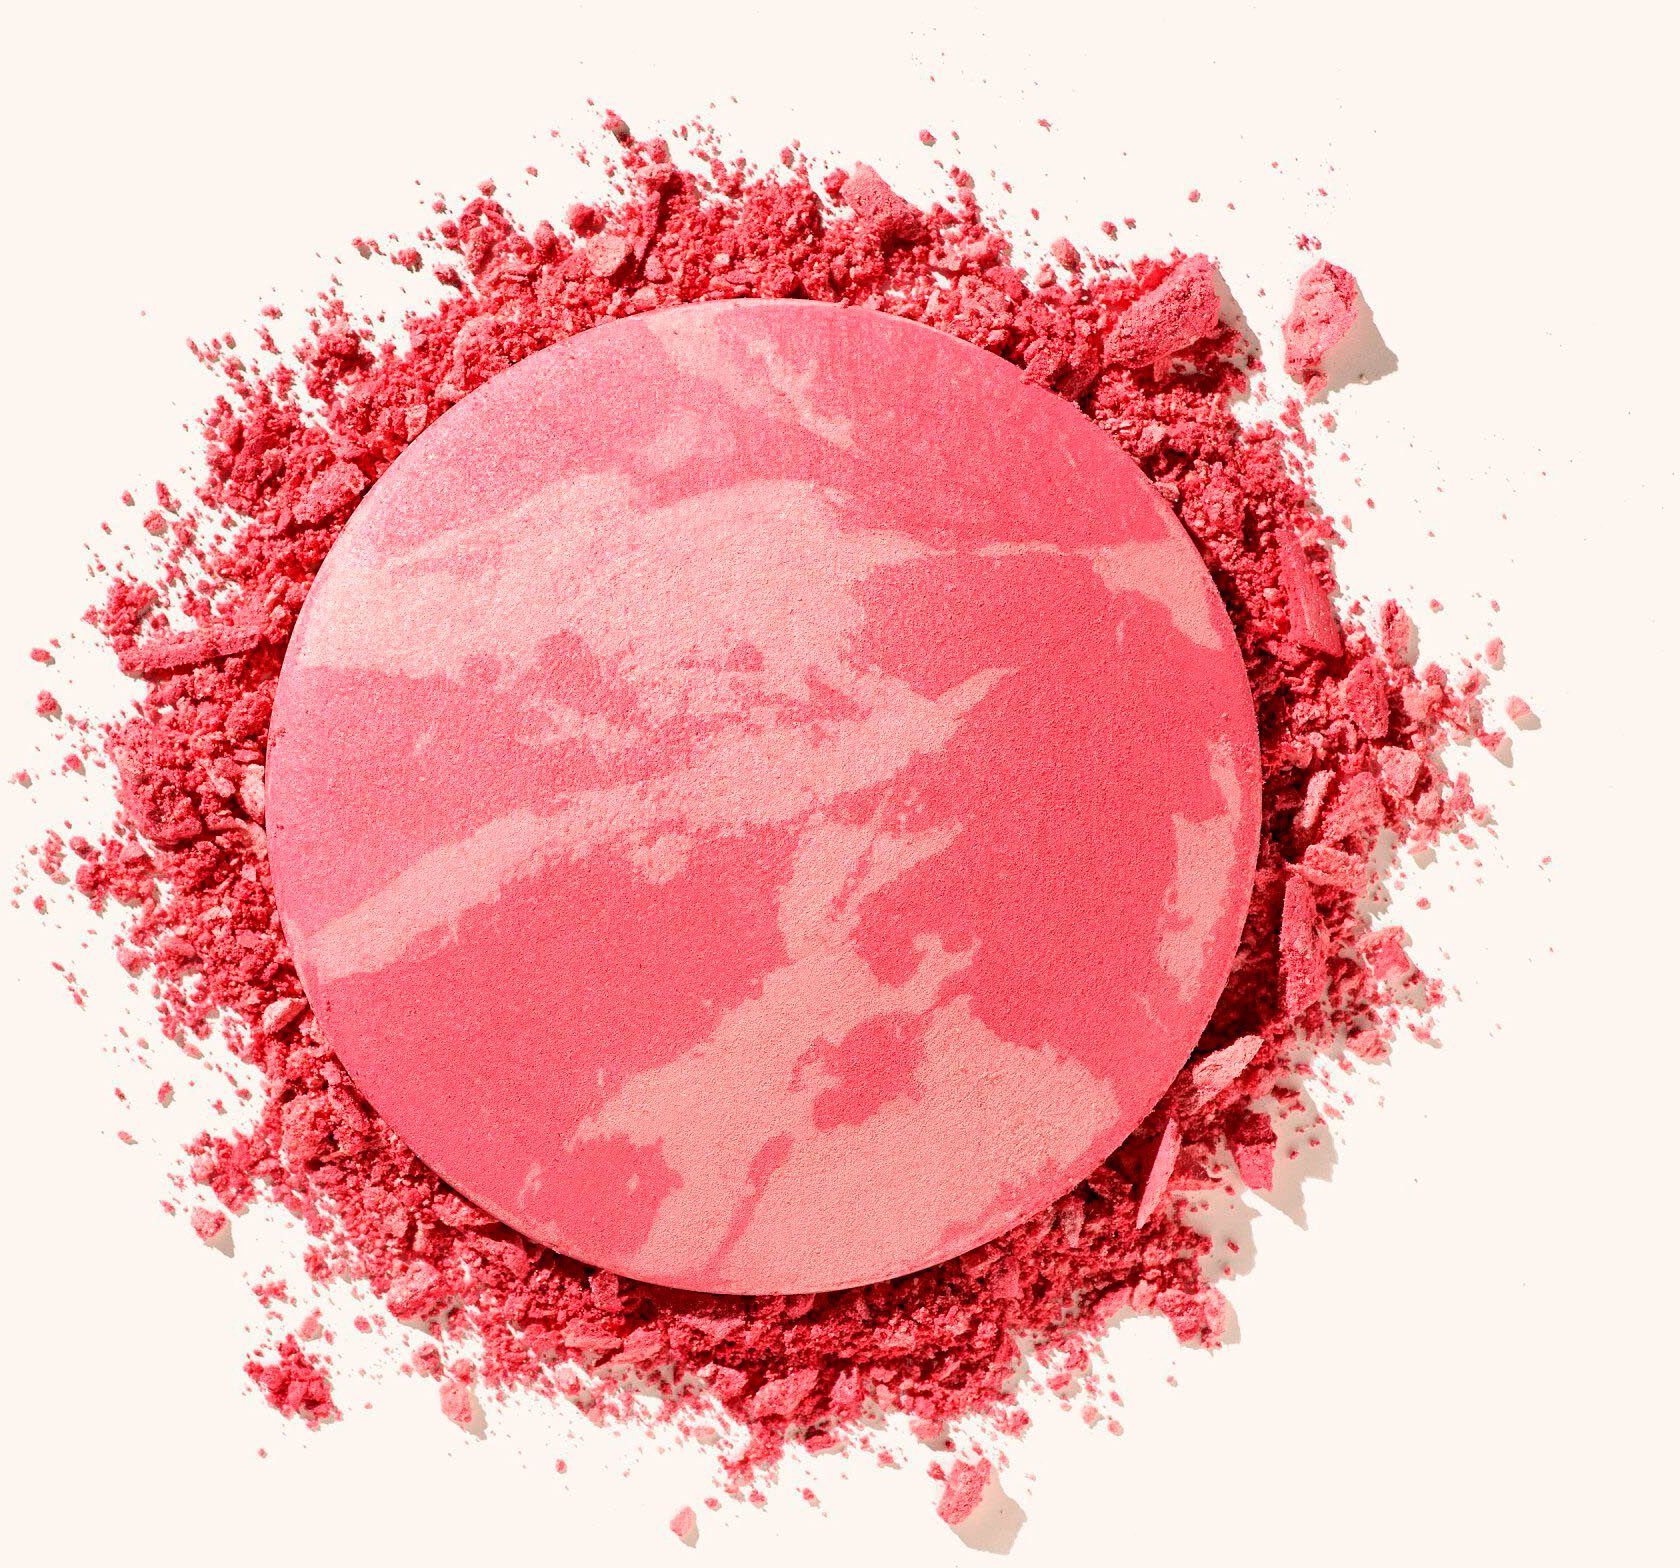 Blush, Cheek Marbled Rouge Catrice Lover 3-tlg.